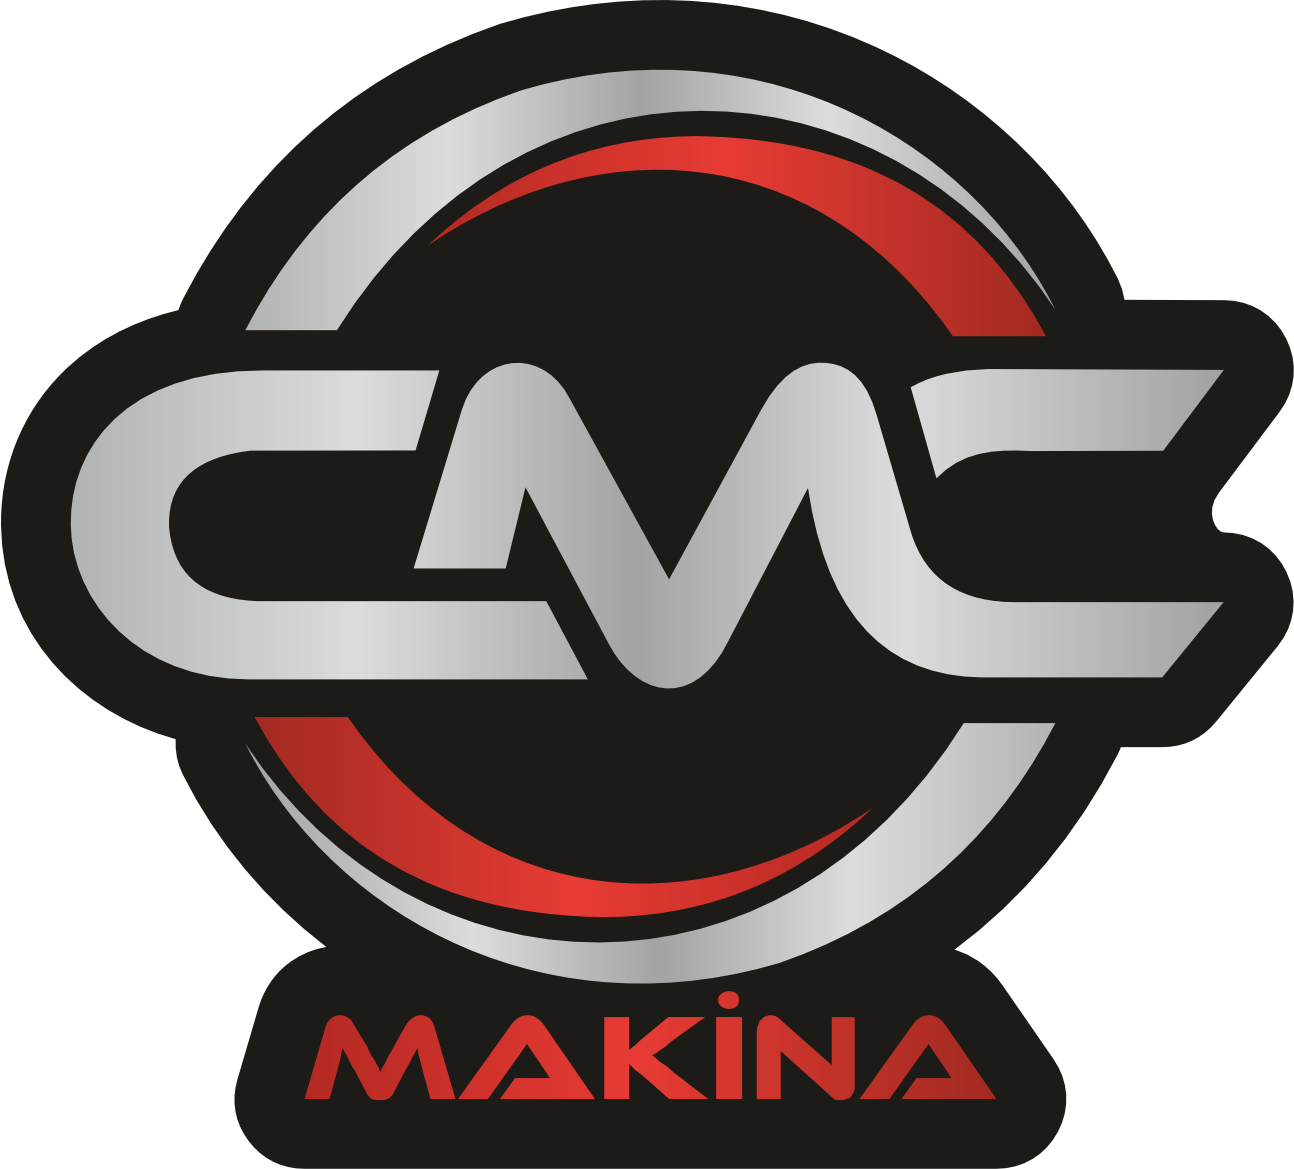 CMC machine is now 10 years old